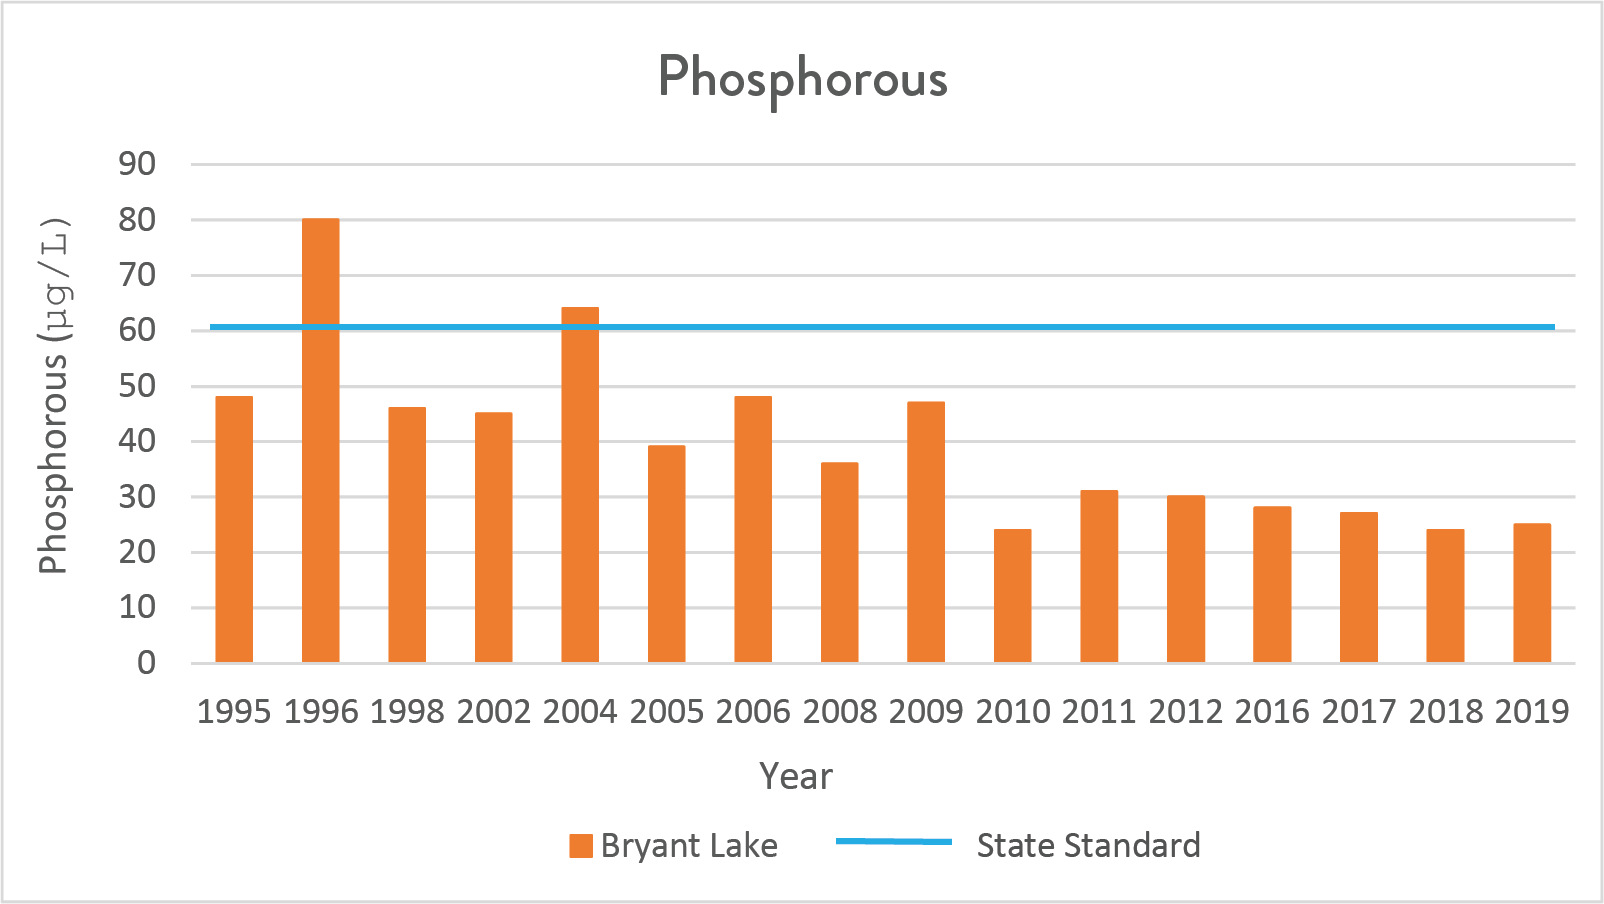 Graph of Phosphorous Levels in Bryant Lake going down since 1995